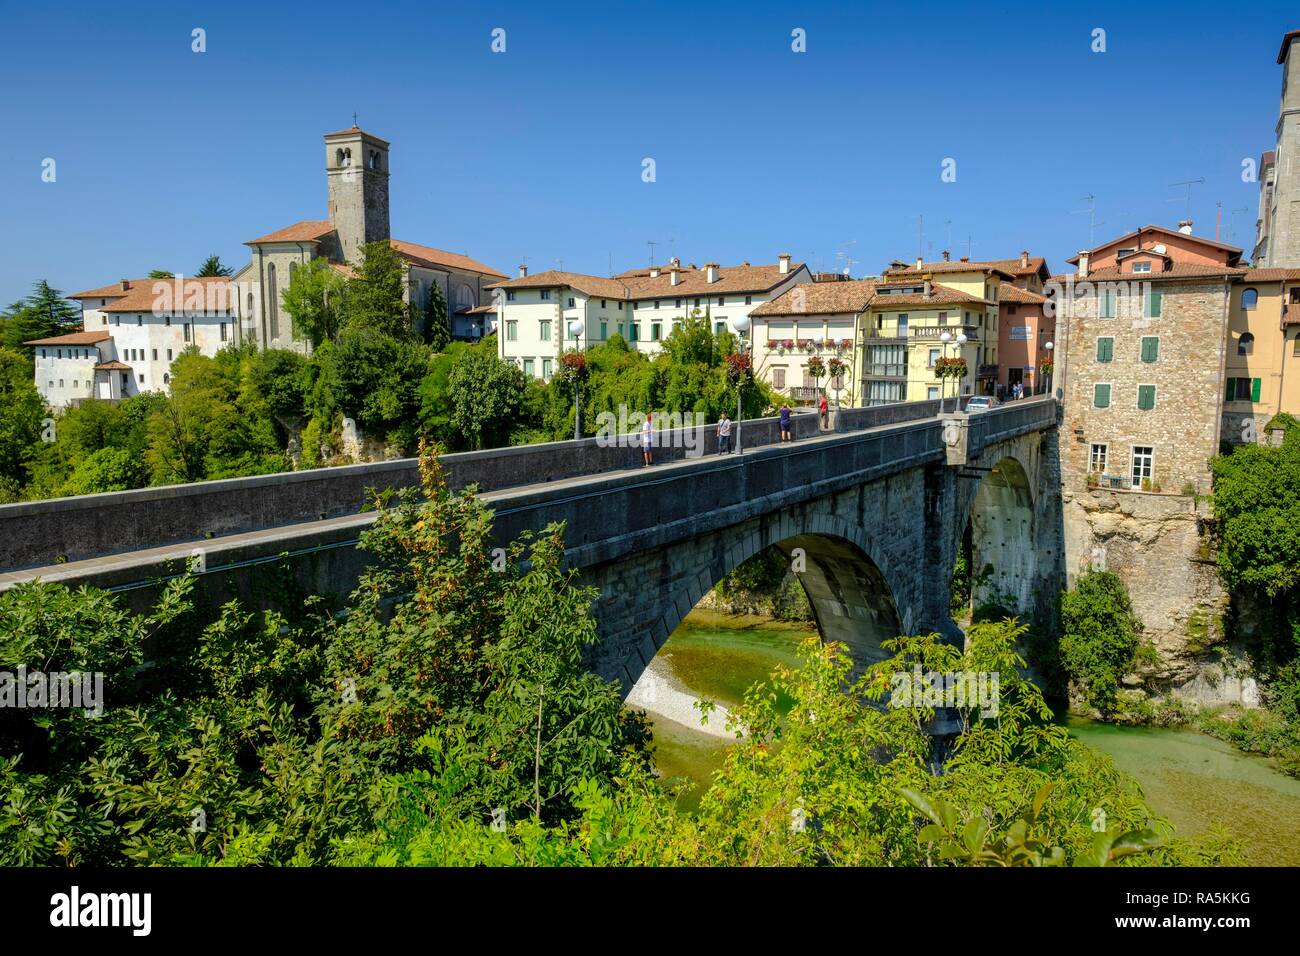 View over the river Natisone to the Campanile of the cathedral Santa Maria Assunta and the old town, Cividale del Friuli Stock Photo